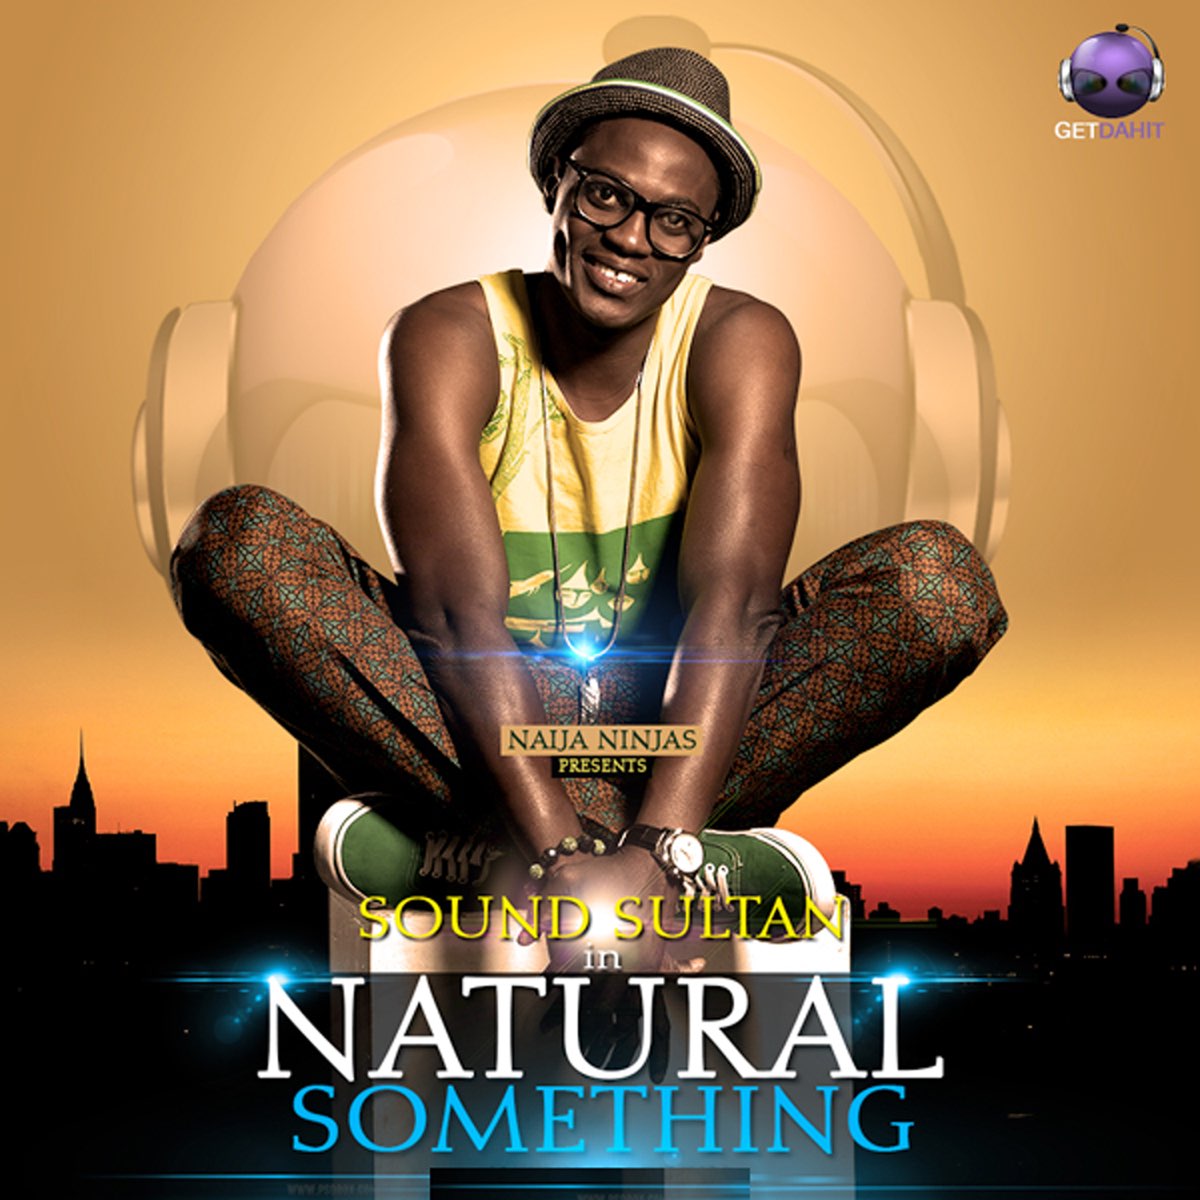 Natural Something - Single by Sound Sultan on Apple Music